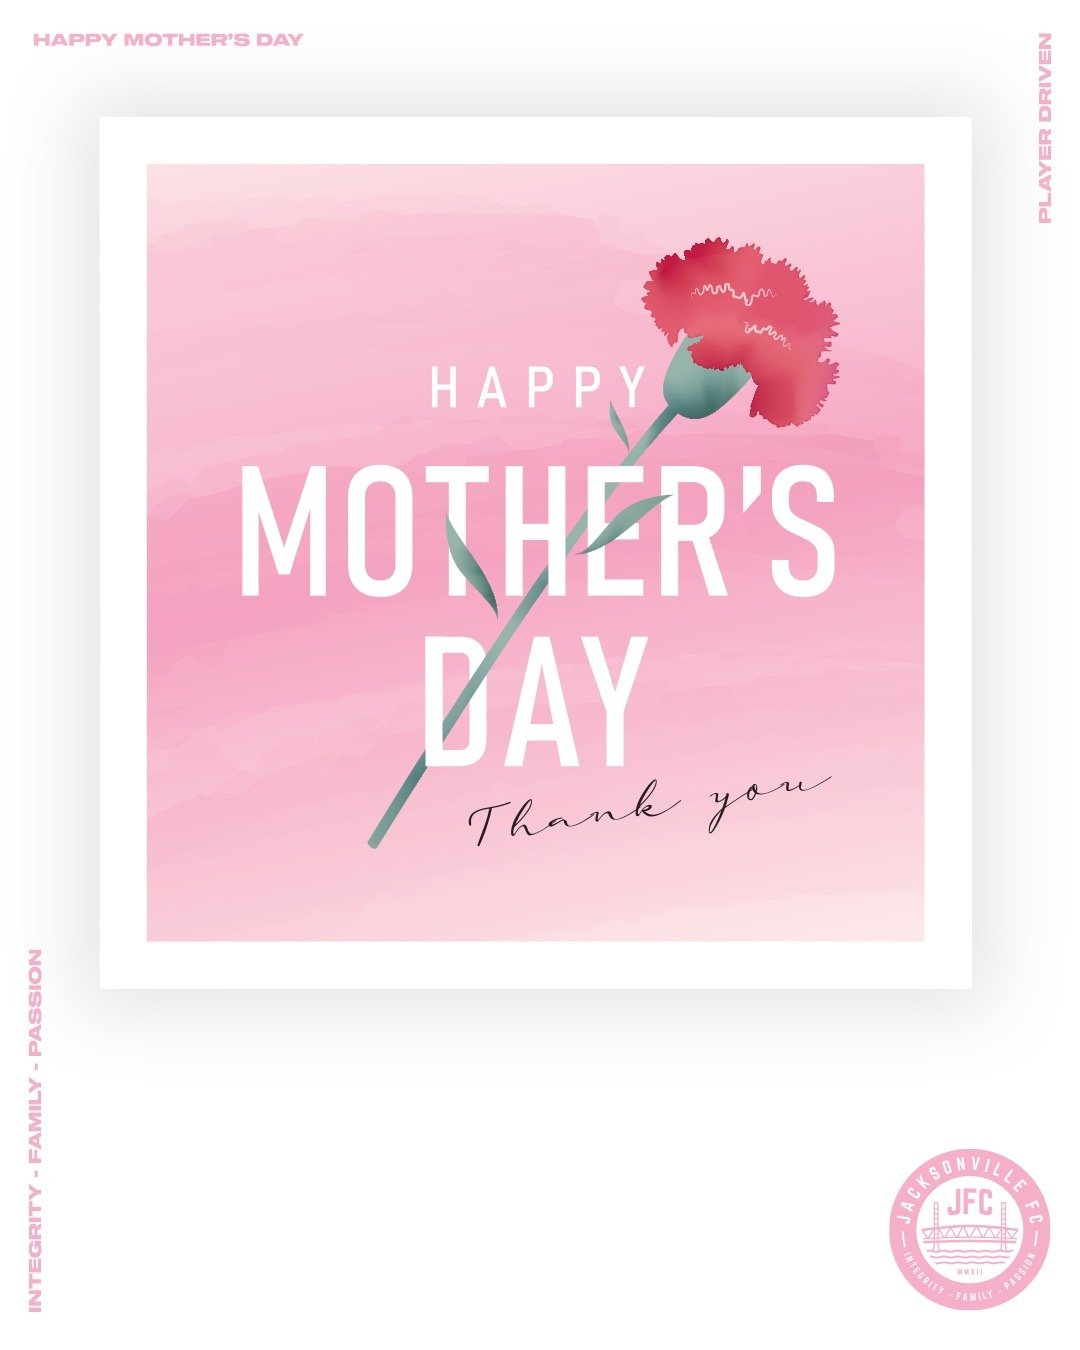 Happy Mother's Day from all of us at Jacksonville FC!!!

Today, we celebrate the incredible moms in our community and beyond. Your strength, love, and dedication inspire us every day. Thank you for everything you do, on and off the field.

Let's hear